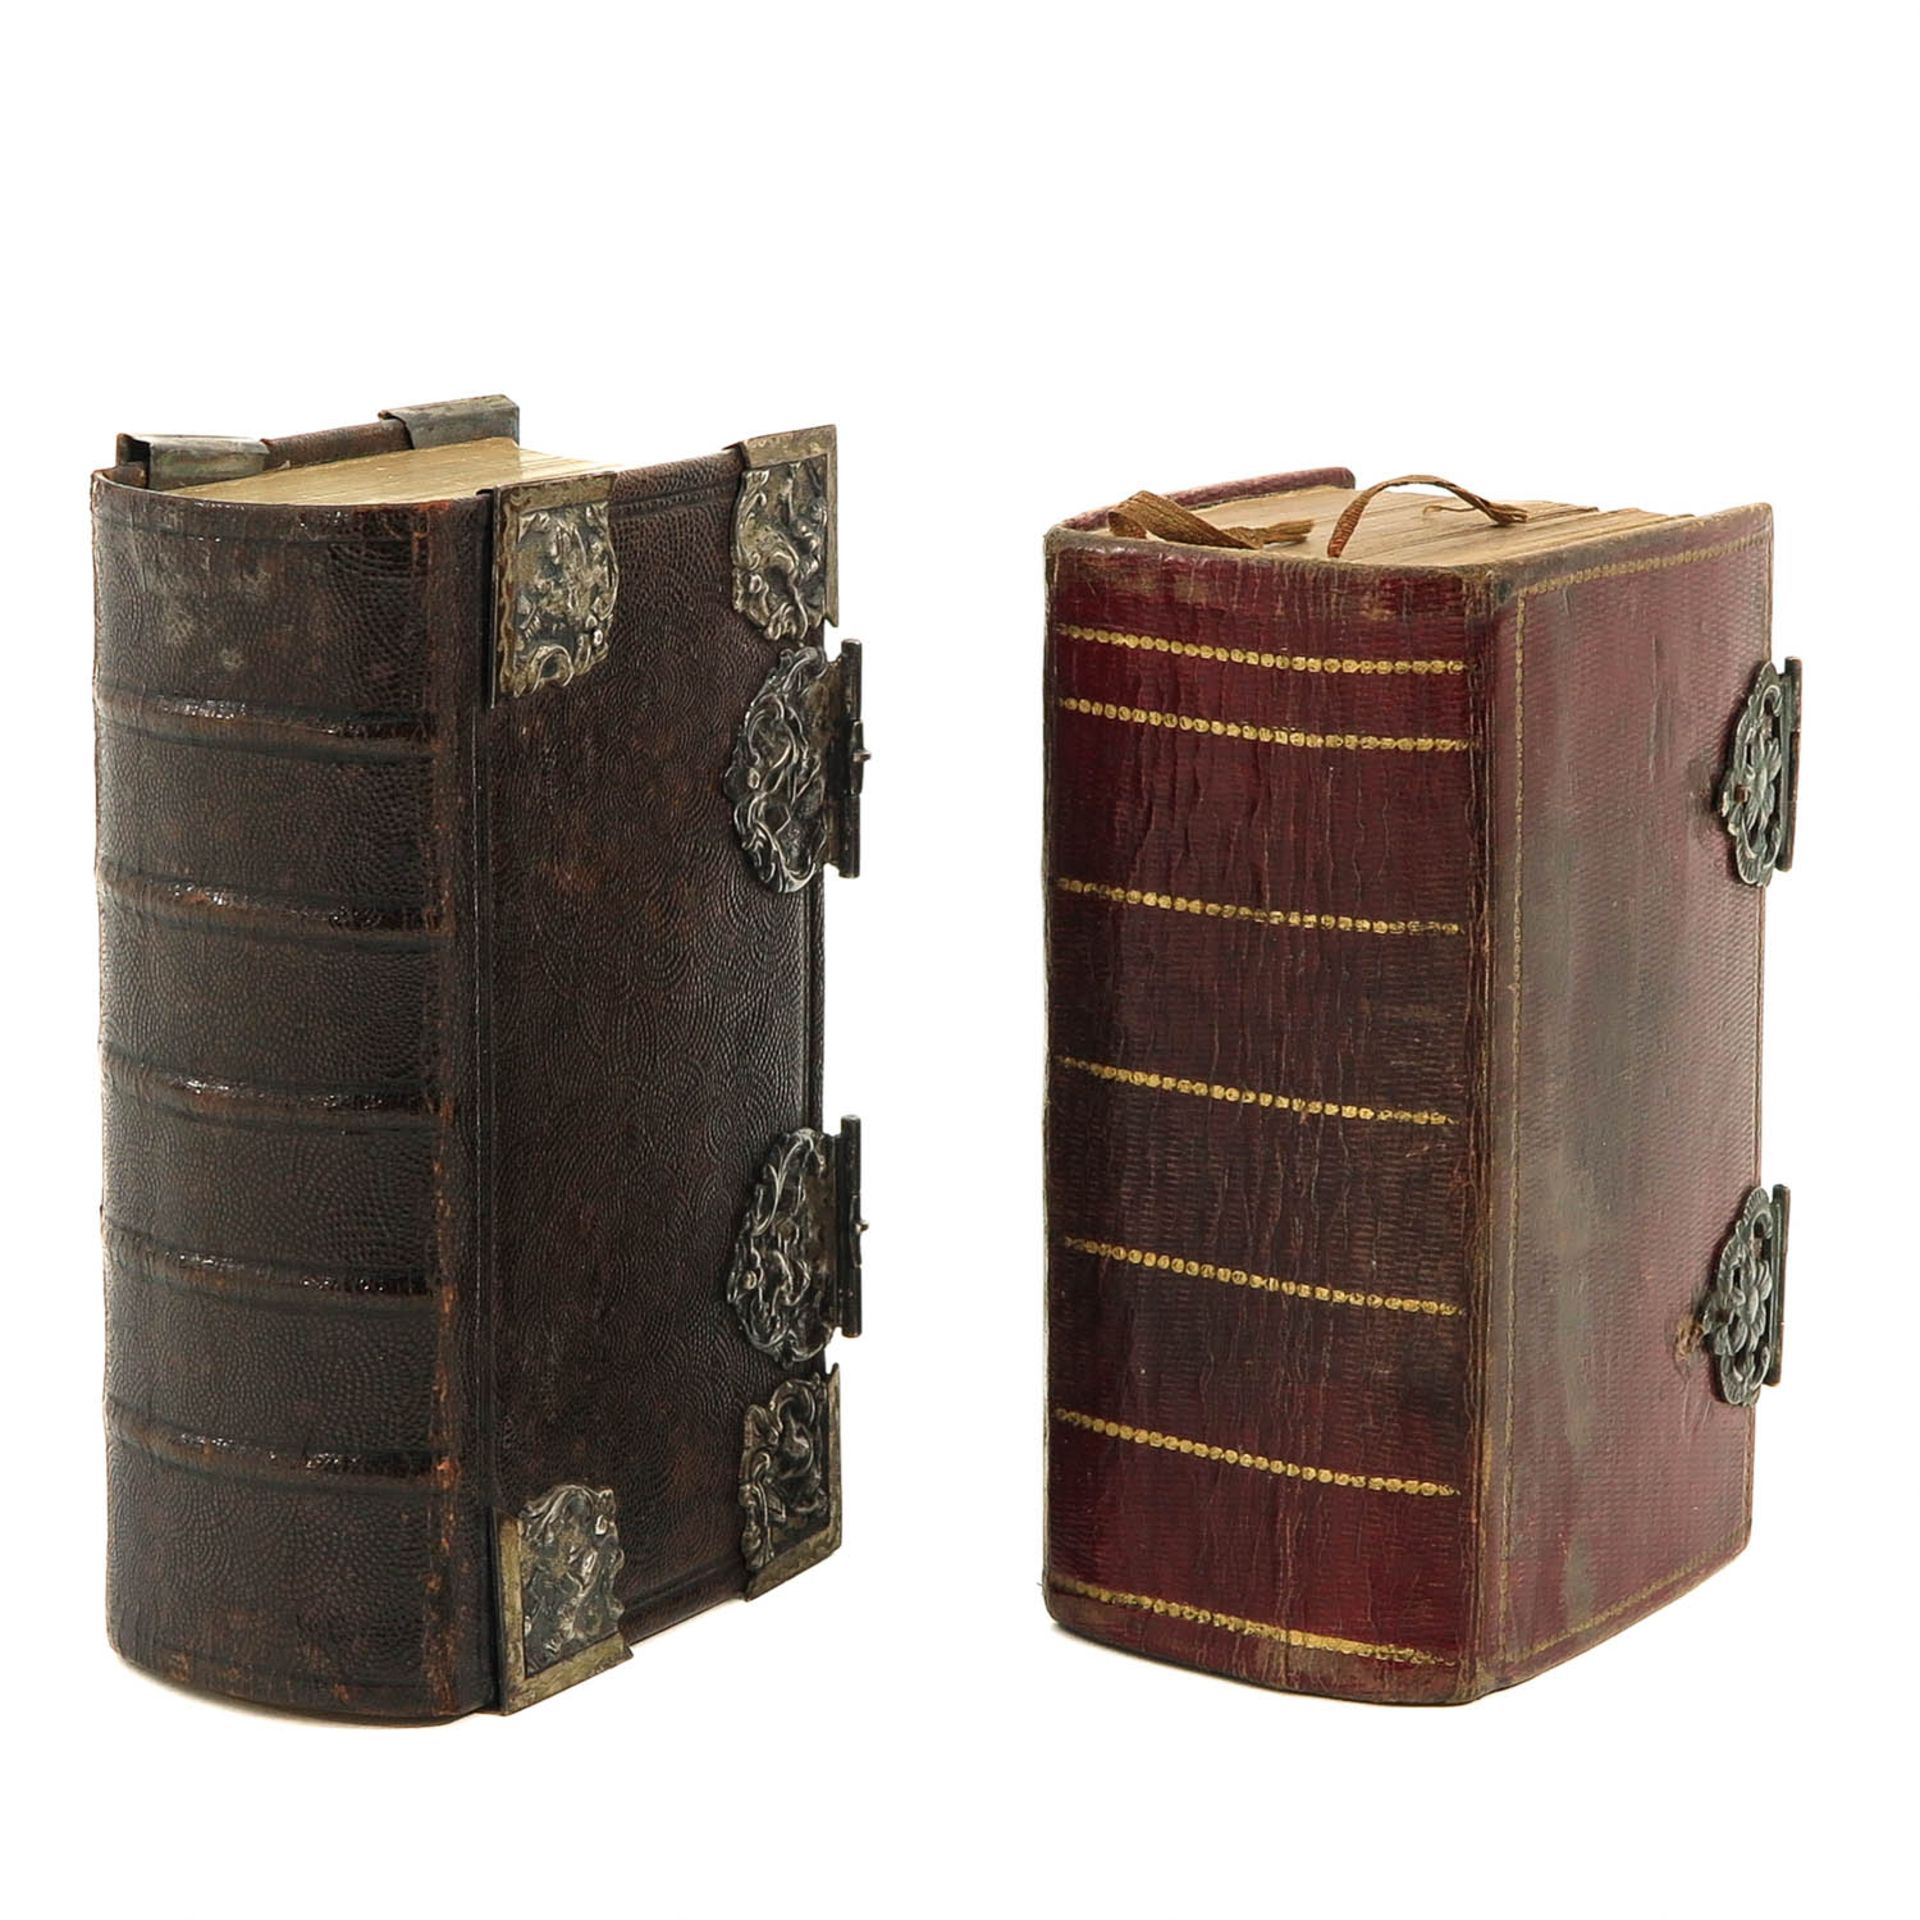 A Lot of 2 Bibles with silver Clasps